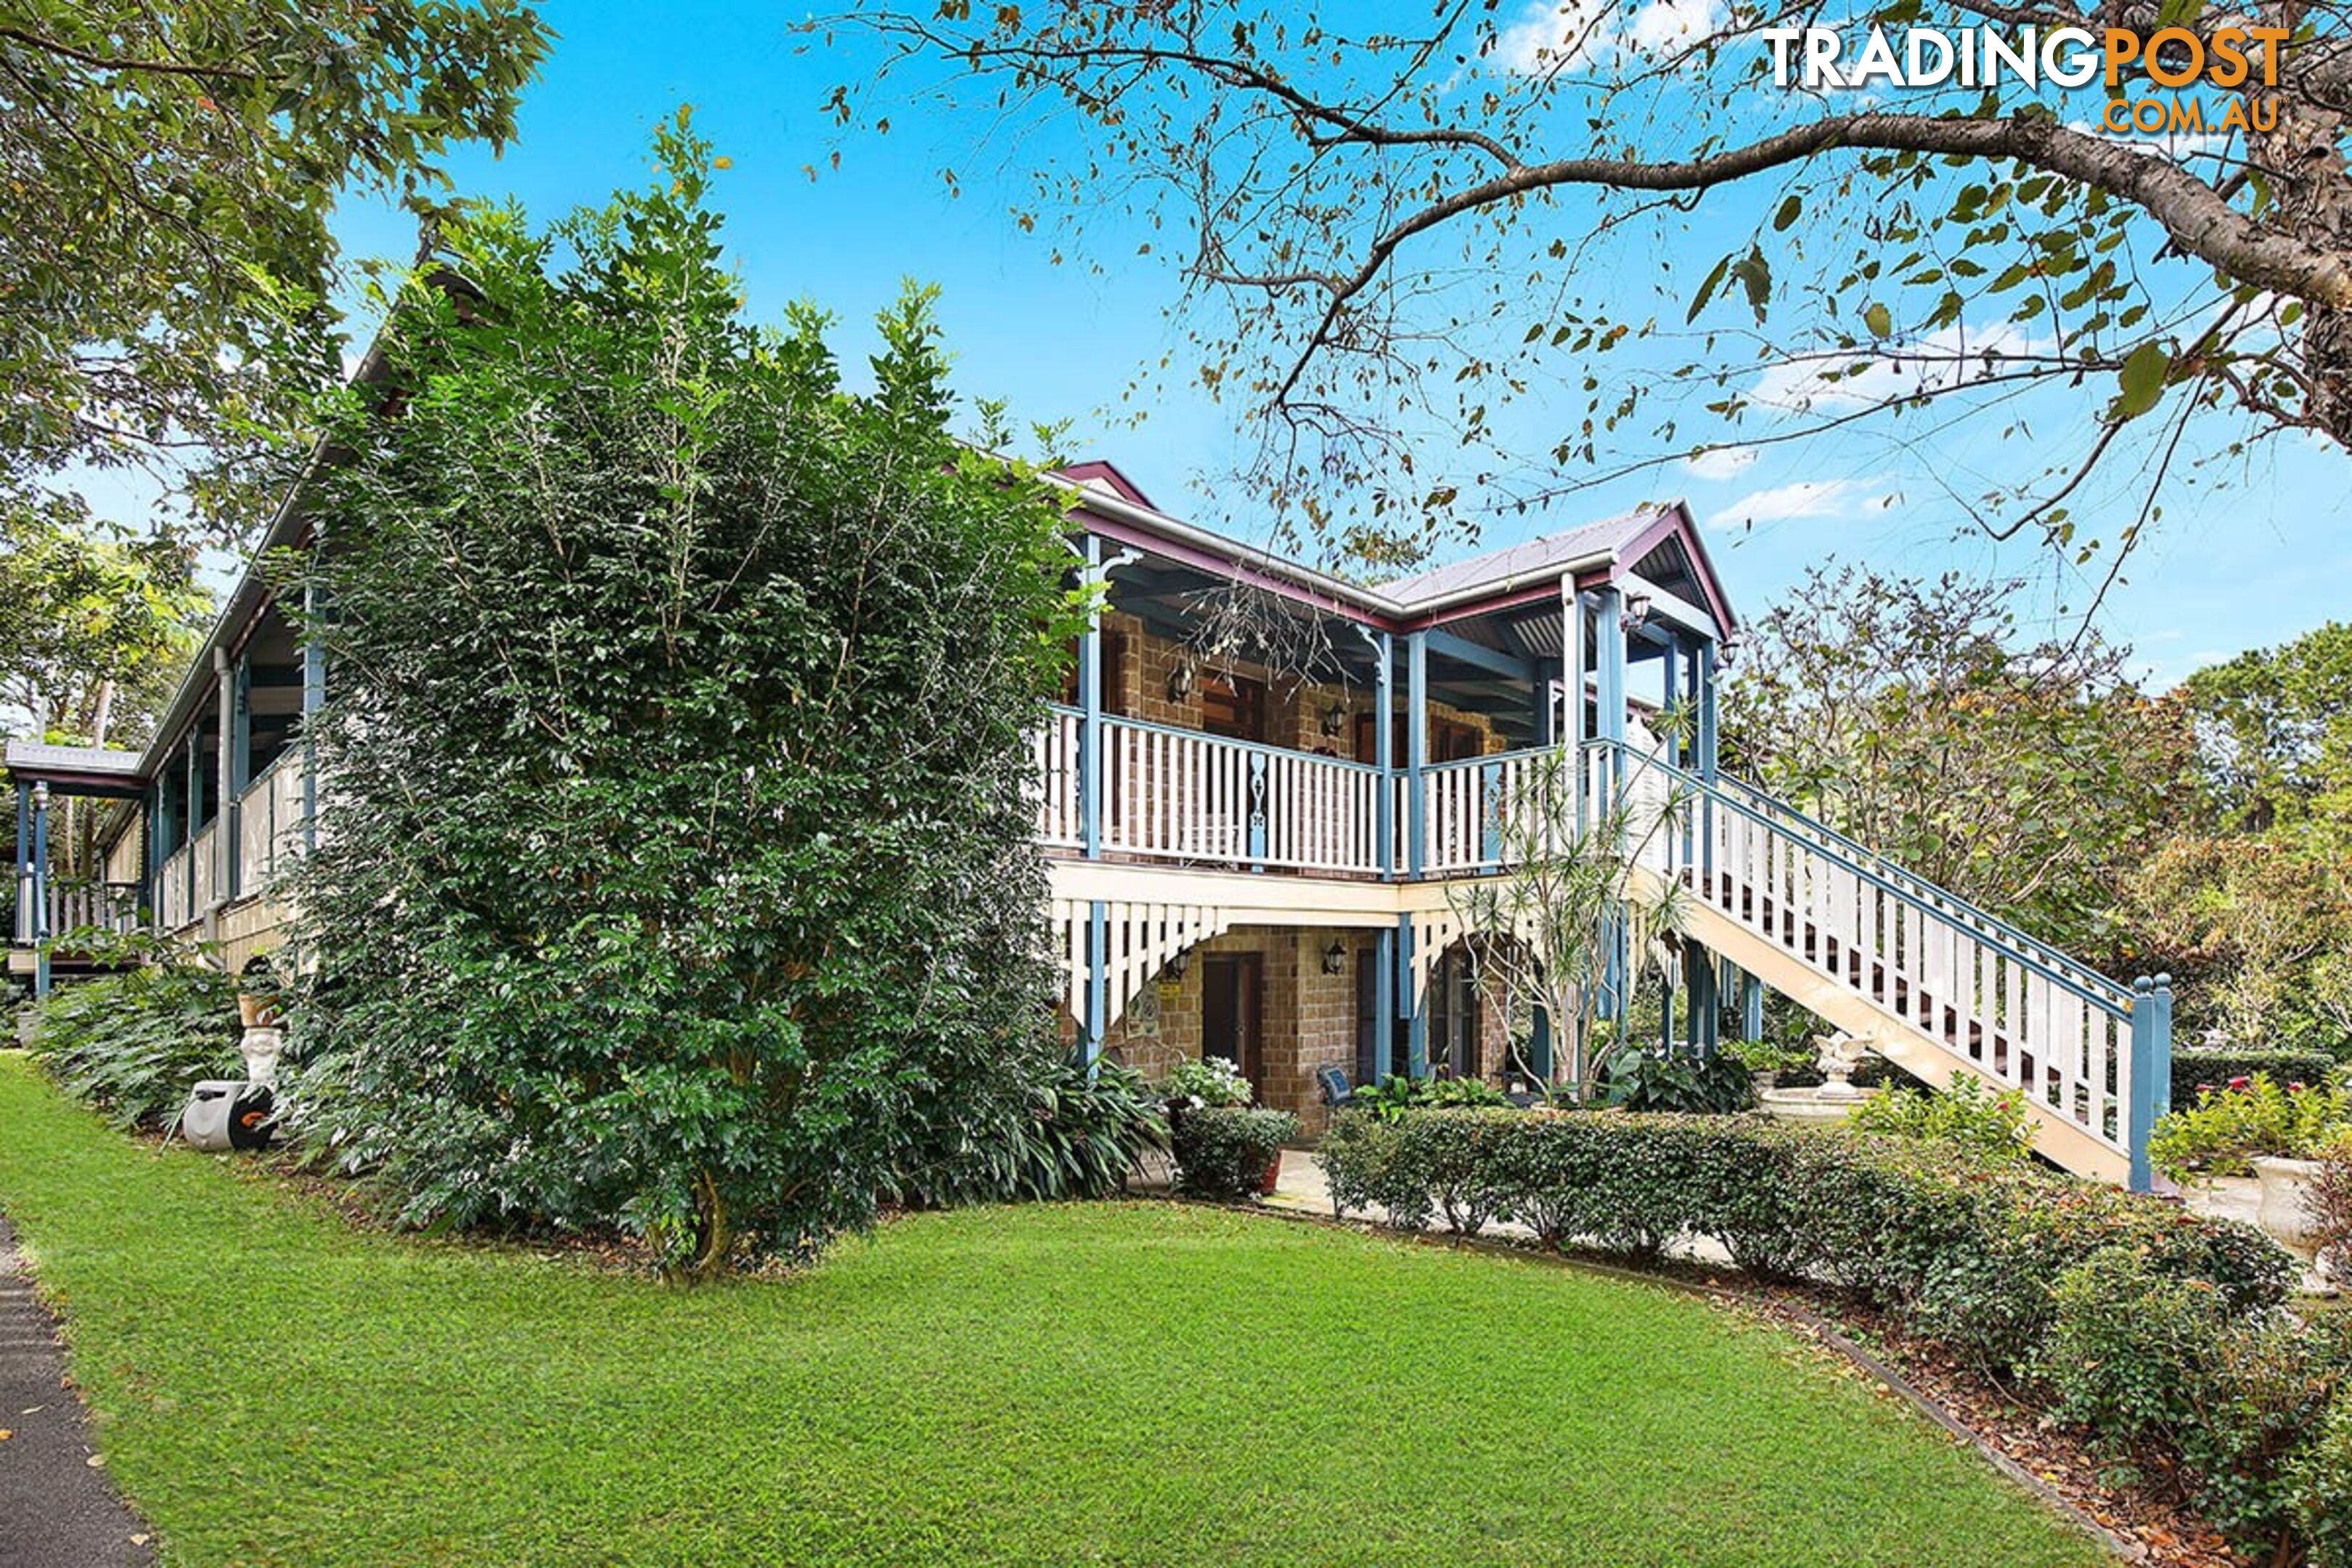 530 Mountain View Road MALENY QLD 4552